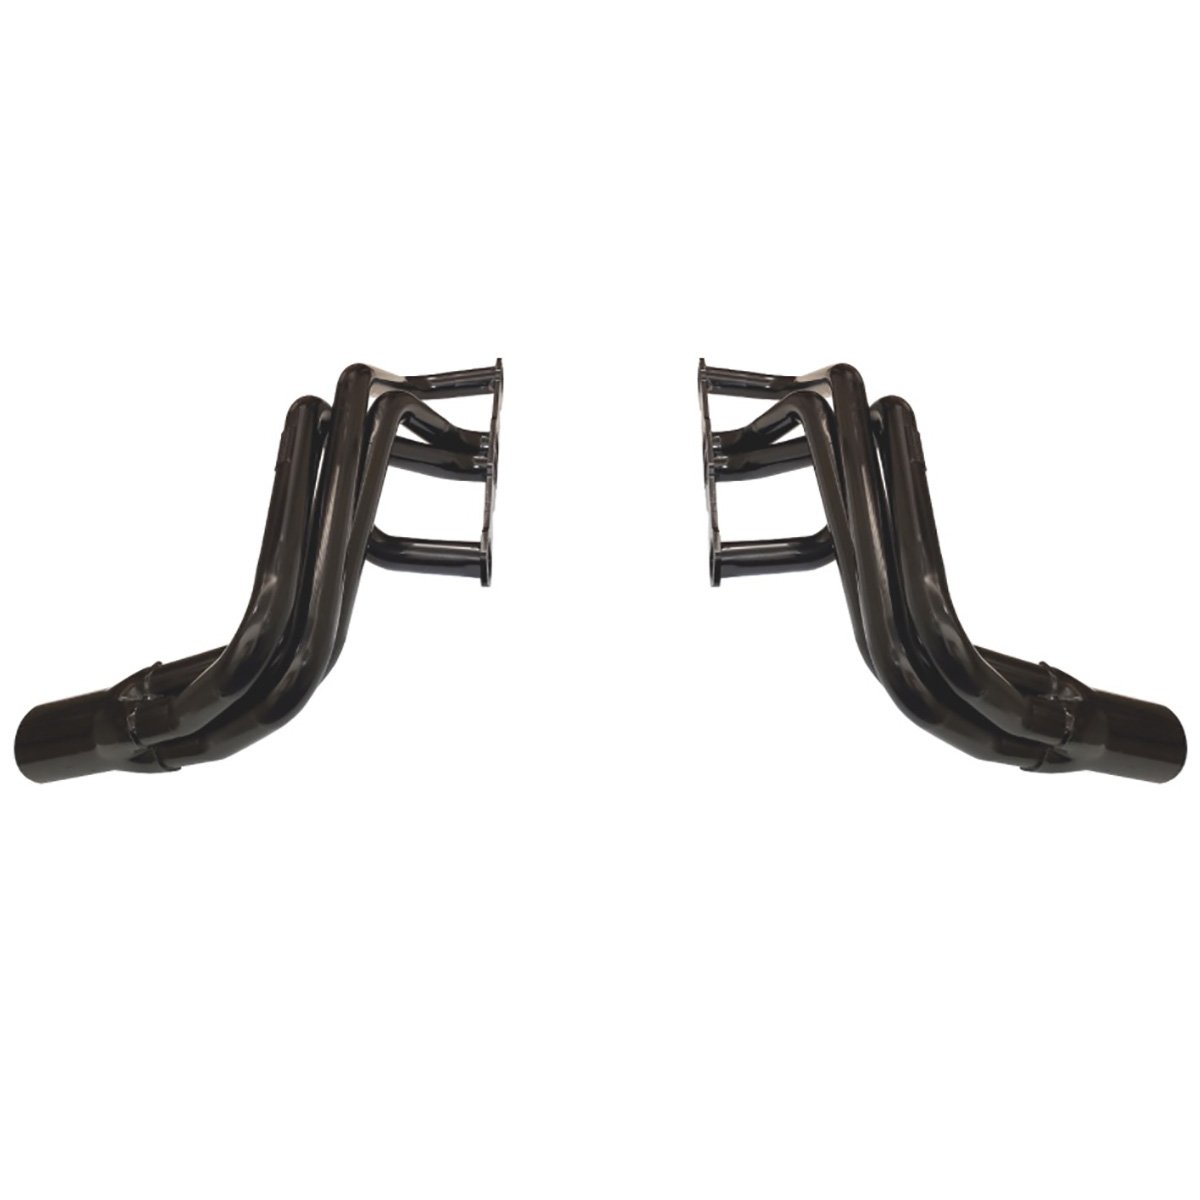 Forward Exit Conversion Headers 1973-1988 GM G-Body - Standard Port Small Block Chevy